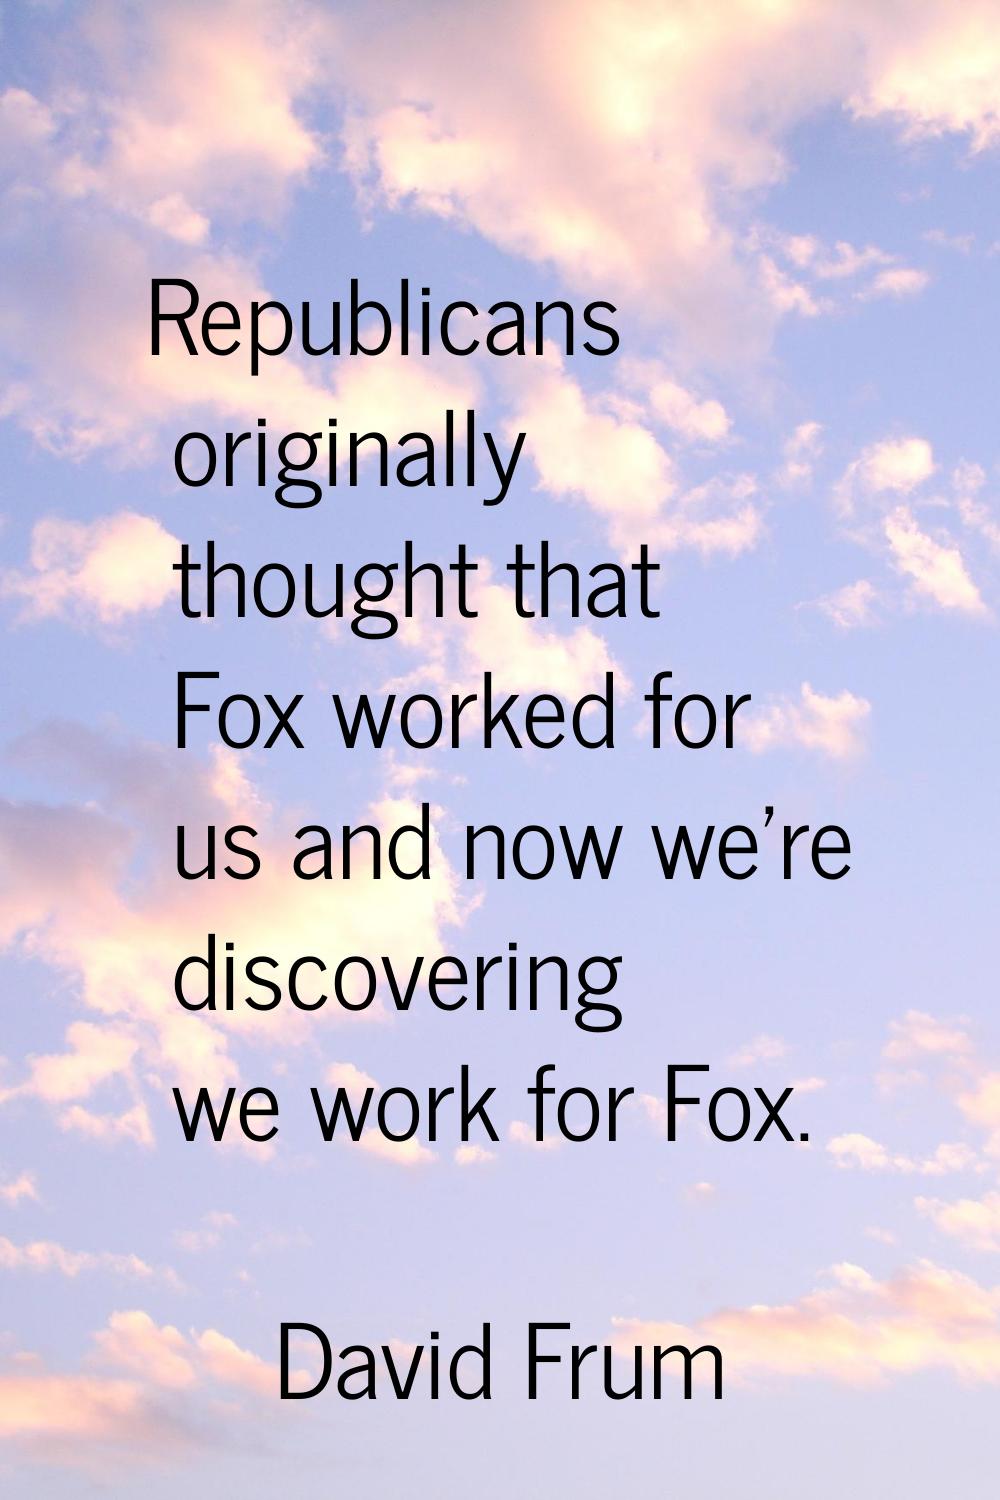 Republicans originally thought that Fox worked for us and now we're discovering we work for Fox.